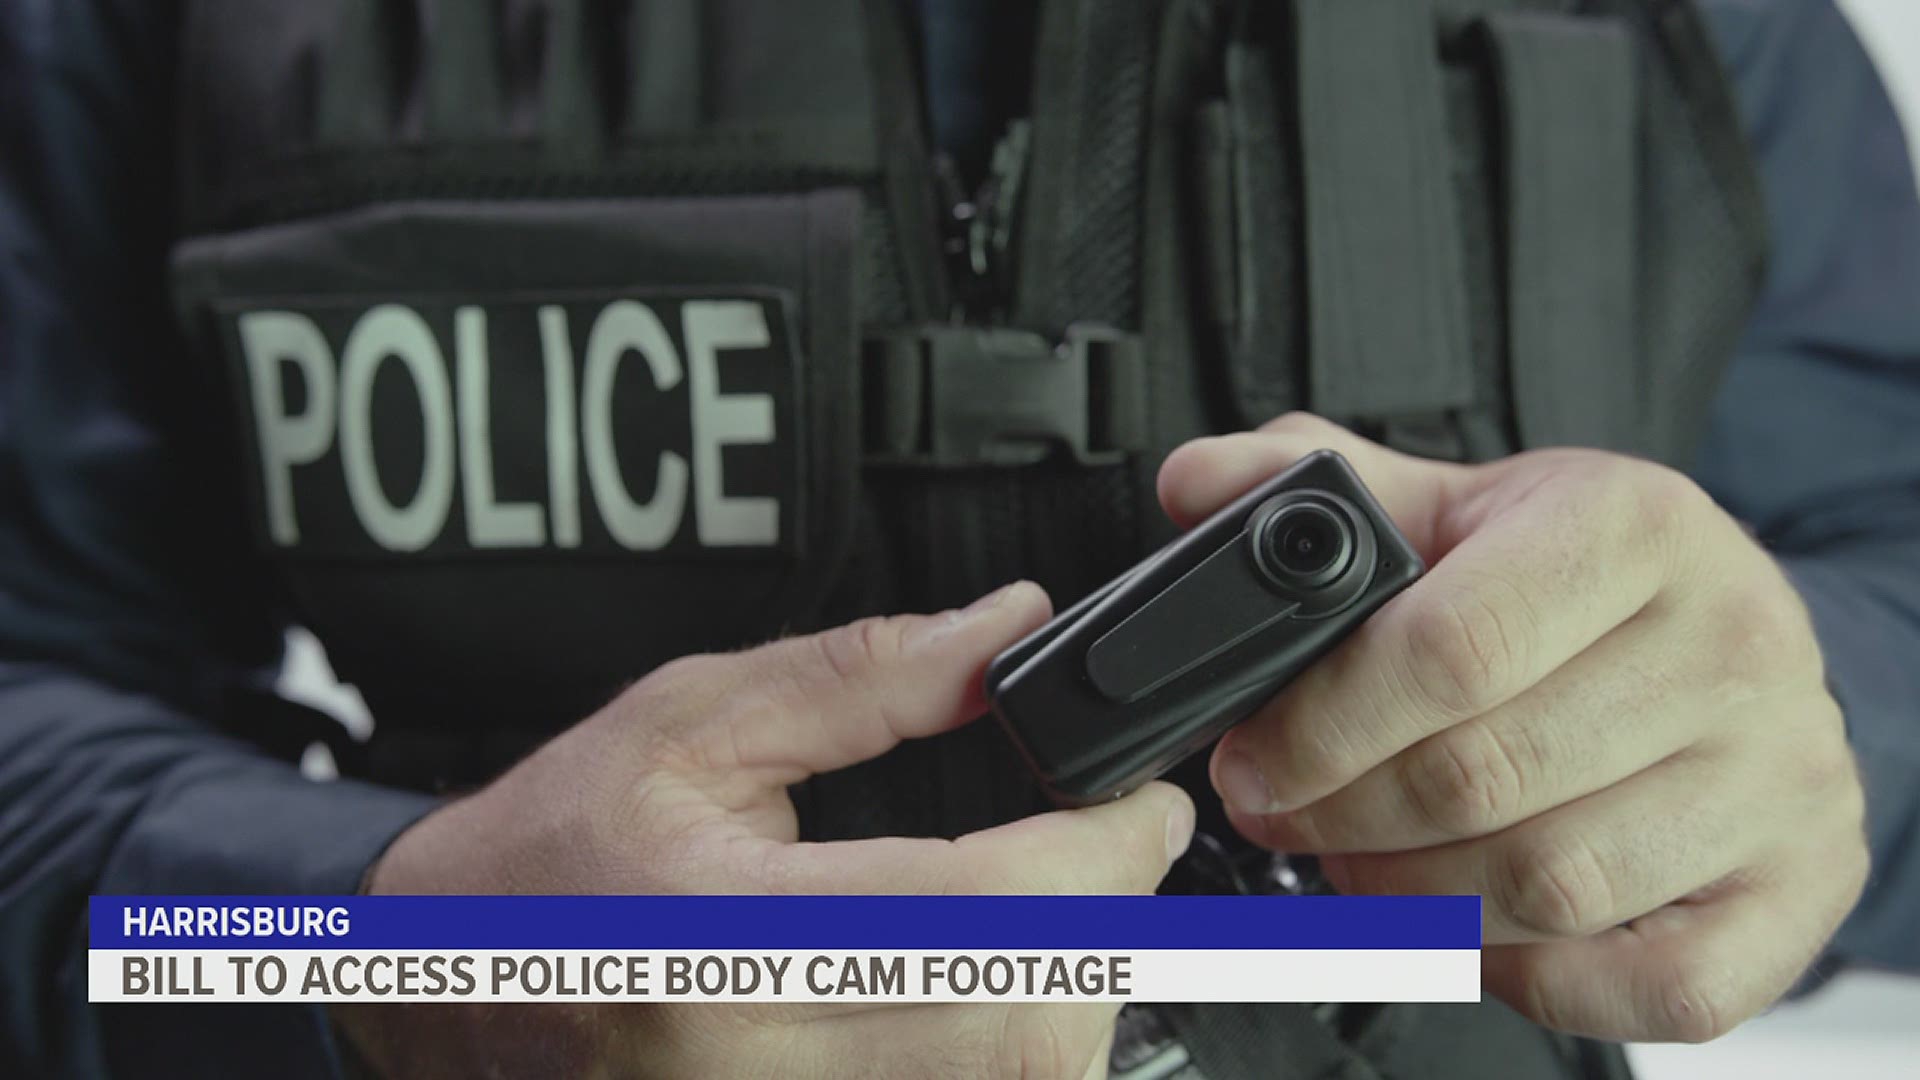 Act 22 of 2017 approved the use of body cameras by law enforcement, but also made that footage unavailable to the public through the state’s Right-To-Know law.